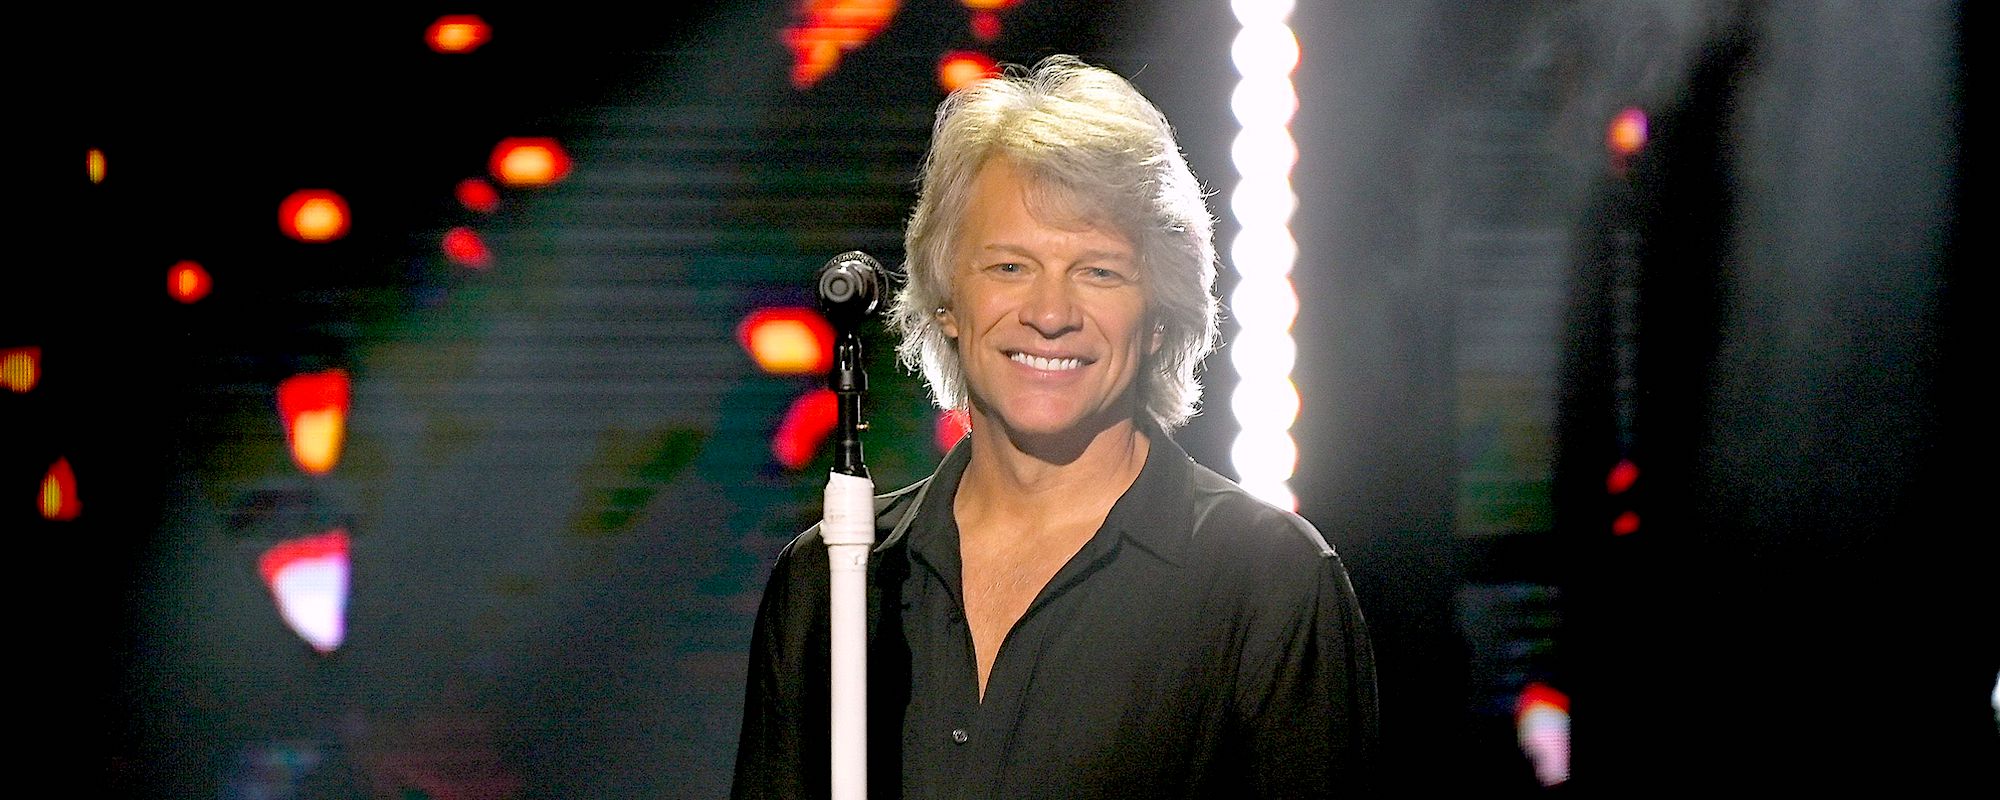 Jon Bon Jovi Addresses Vocal Issues and the Future of Bon Jovi: “If I Can’t Be Great, I’m Out”